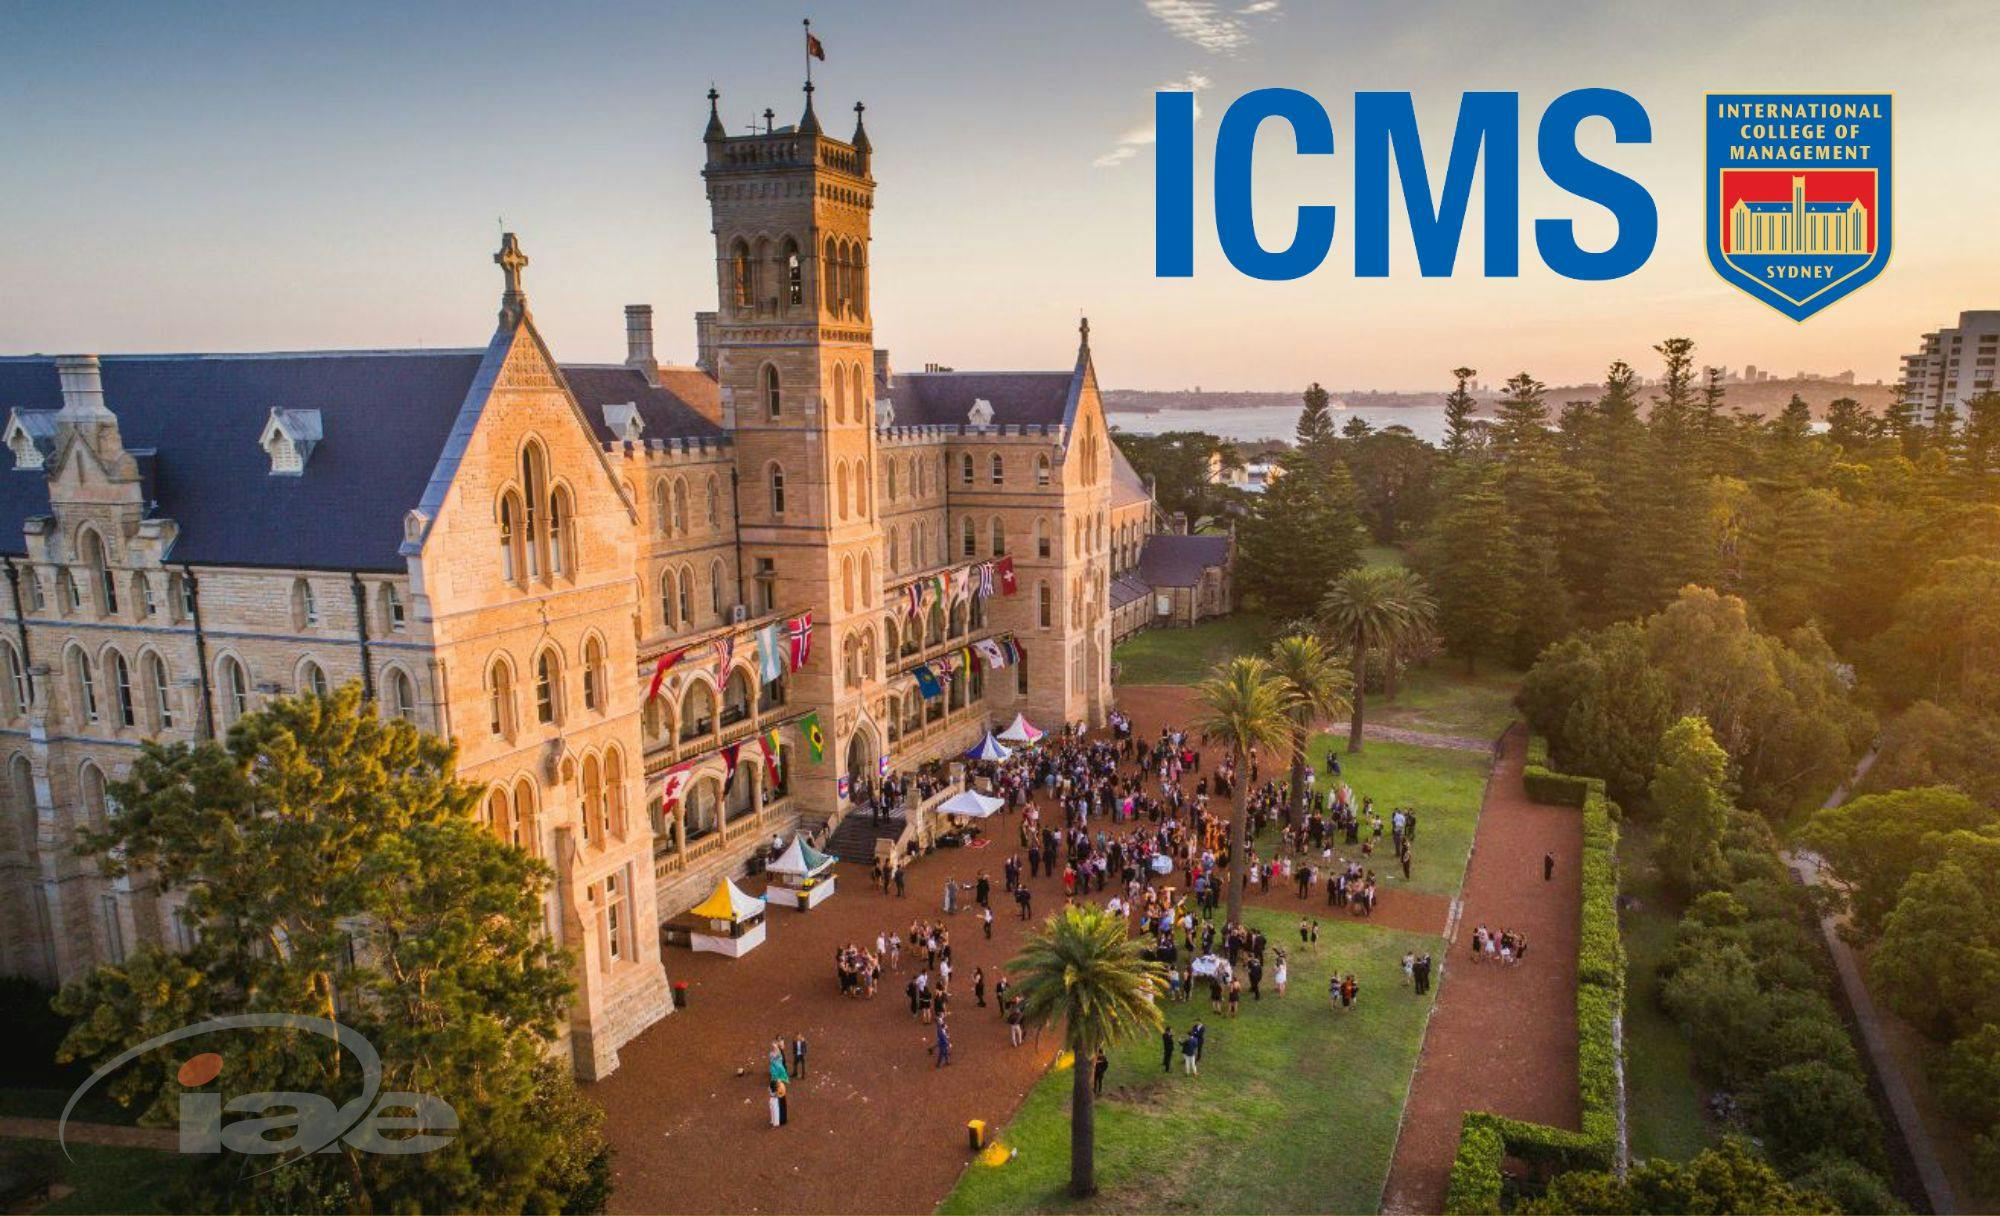 STUDY AT ICMS (Sydney) with a $14,000 scholarship: Do a Management/Business Degree at ICMS and Graduate With Work Experience Under Your Belt